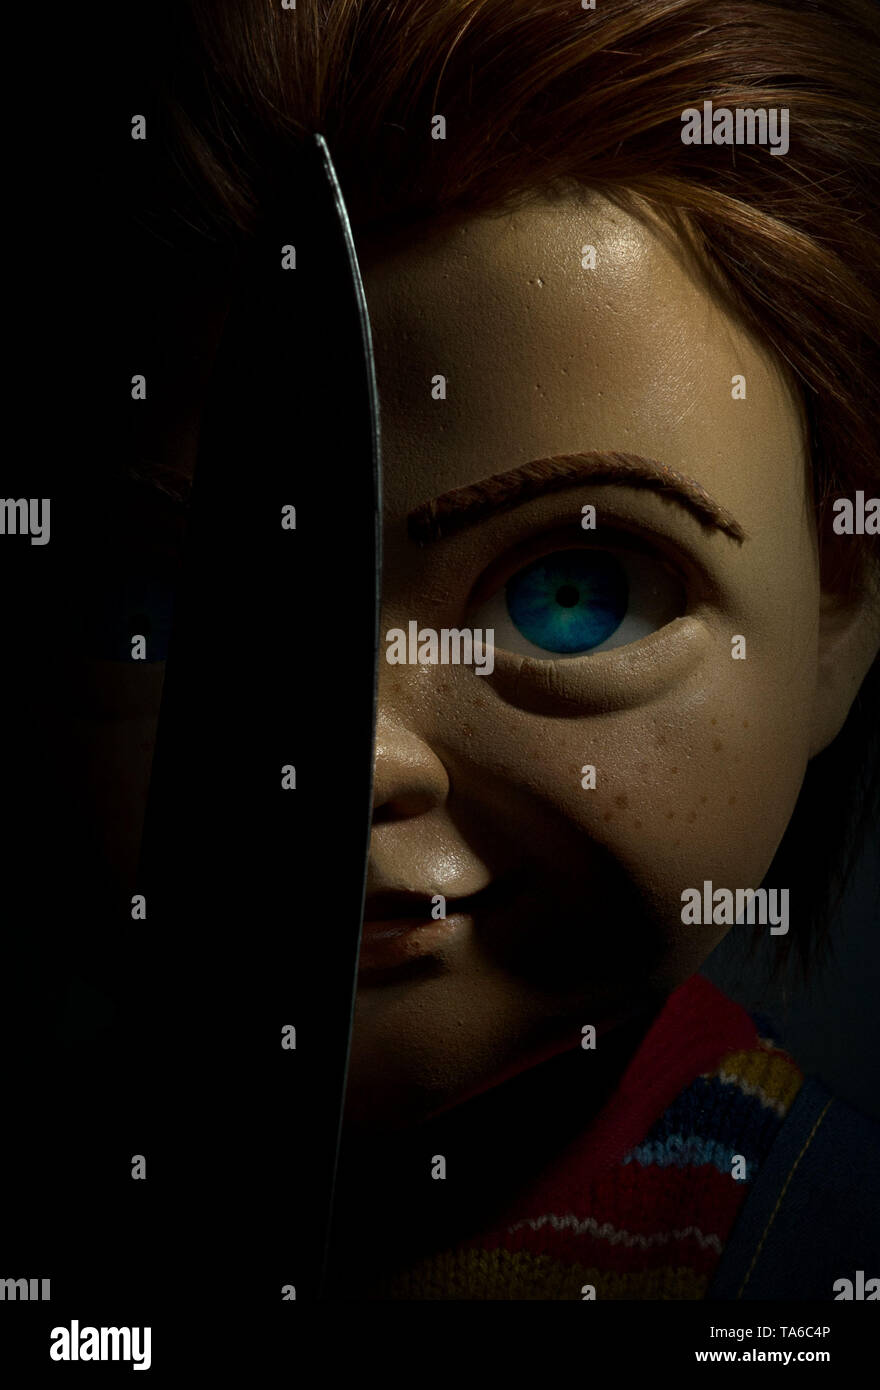 RELEASE DATE: June 21, 2019 TITLE: Child's Play STUDIO: MGM DIRECTOR: Lars Klevberg PLOT: A mother gives her son a toy doll for his birthday, unaware of its more sinister nature. STARRING: Mark Hamill as Chucky (voice) poster art. (Credit Image: © MGM/Entertainment Pictures) Stock Photo